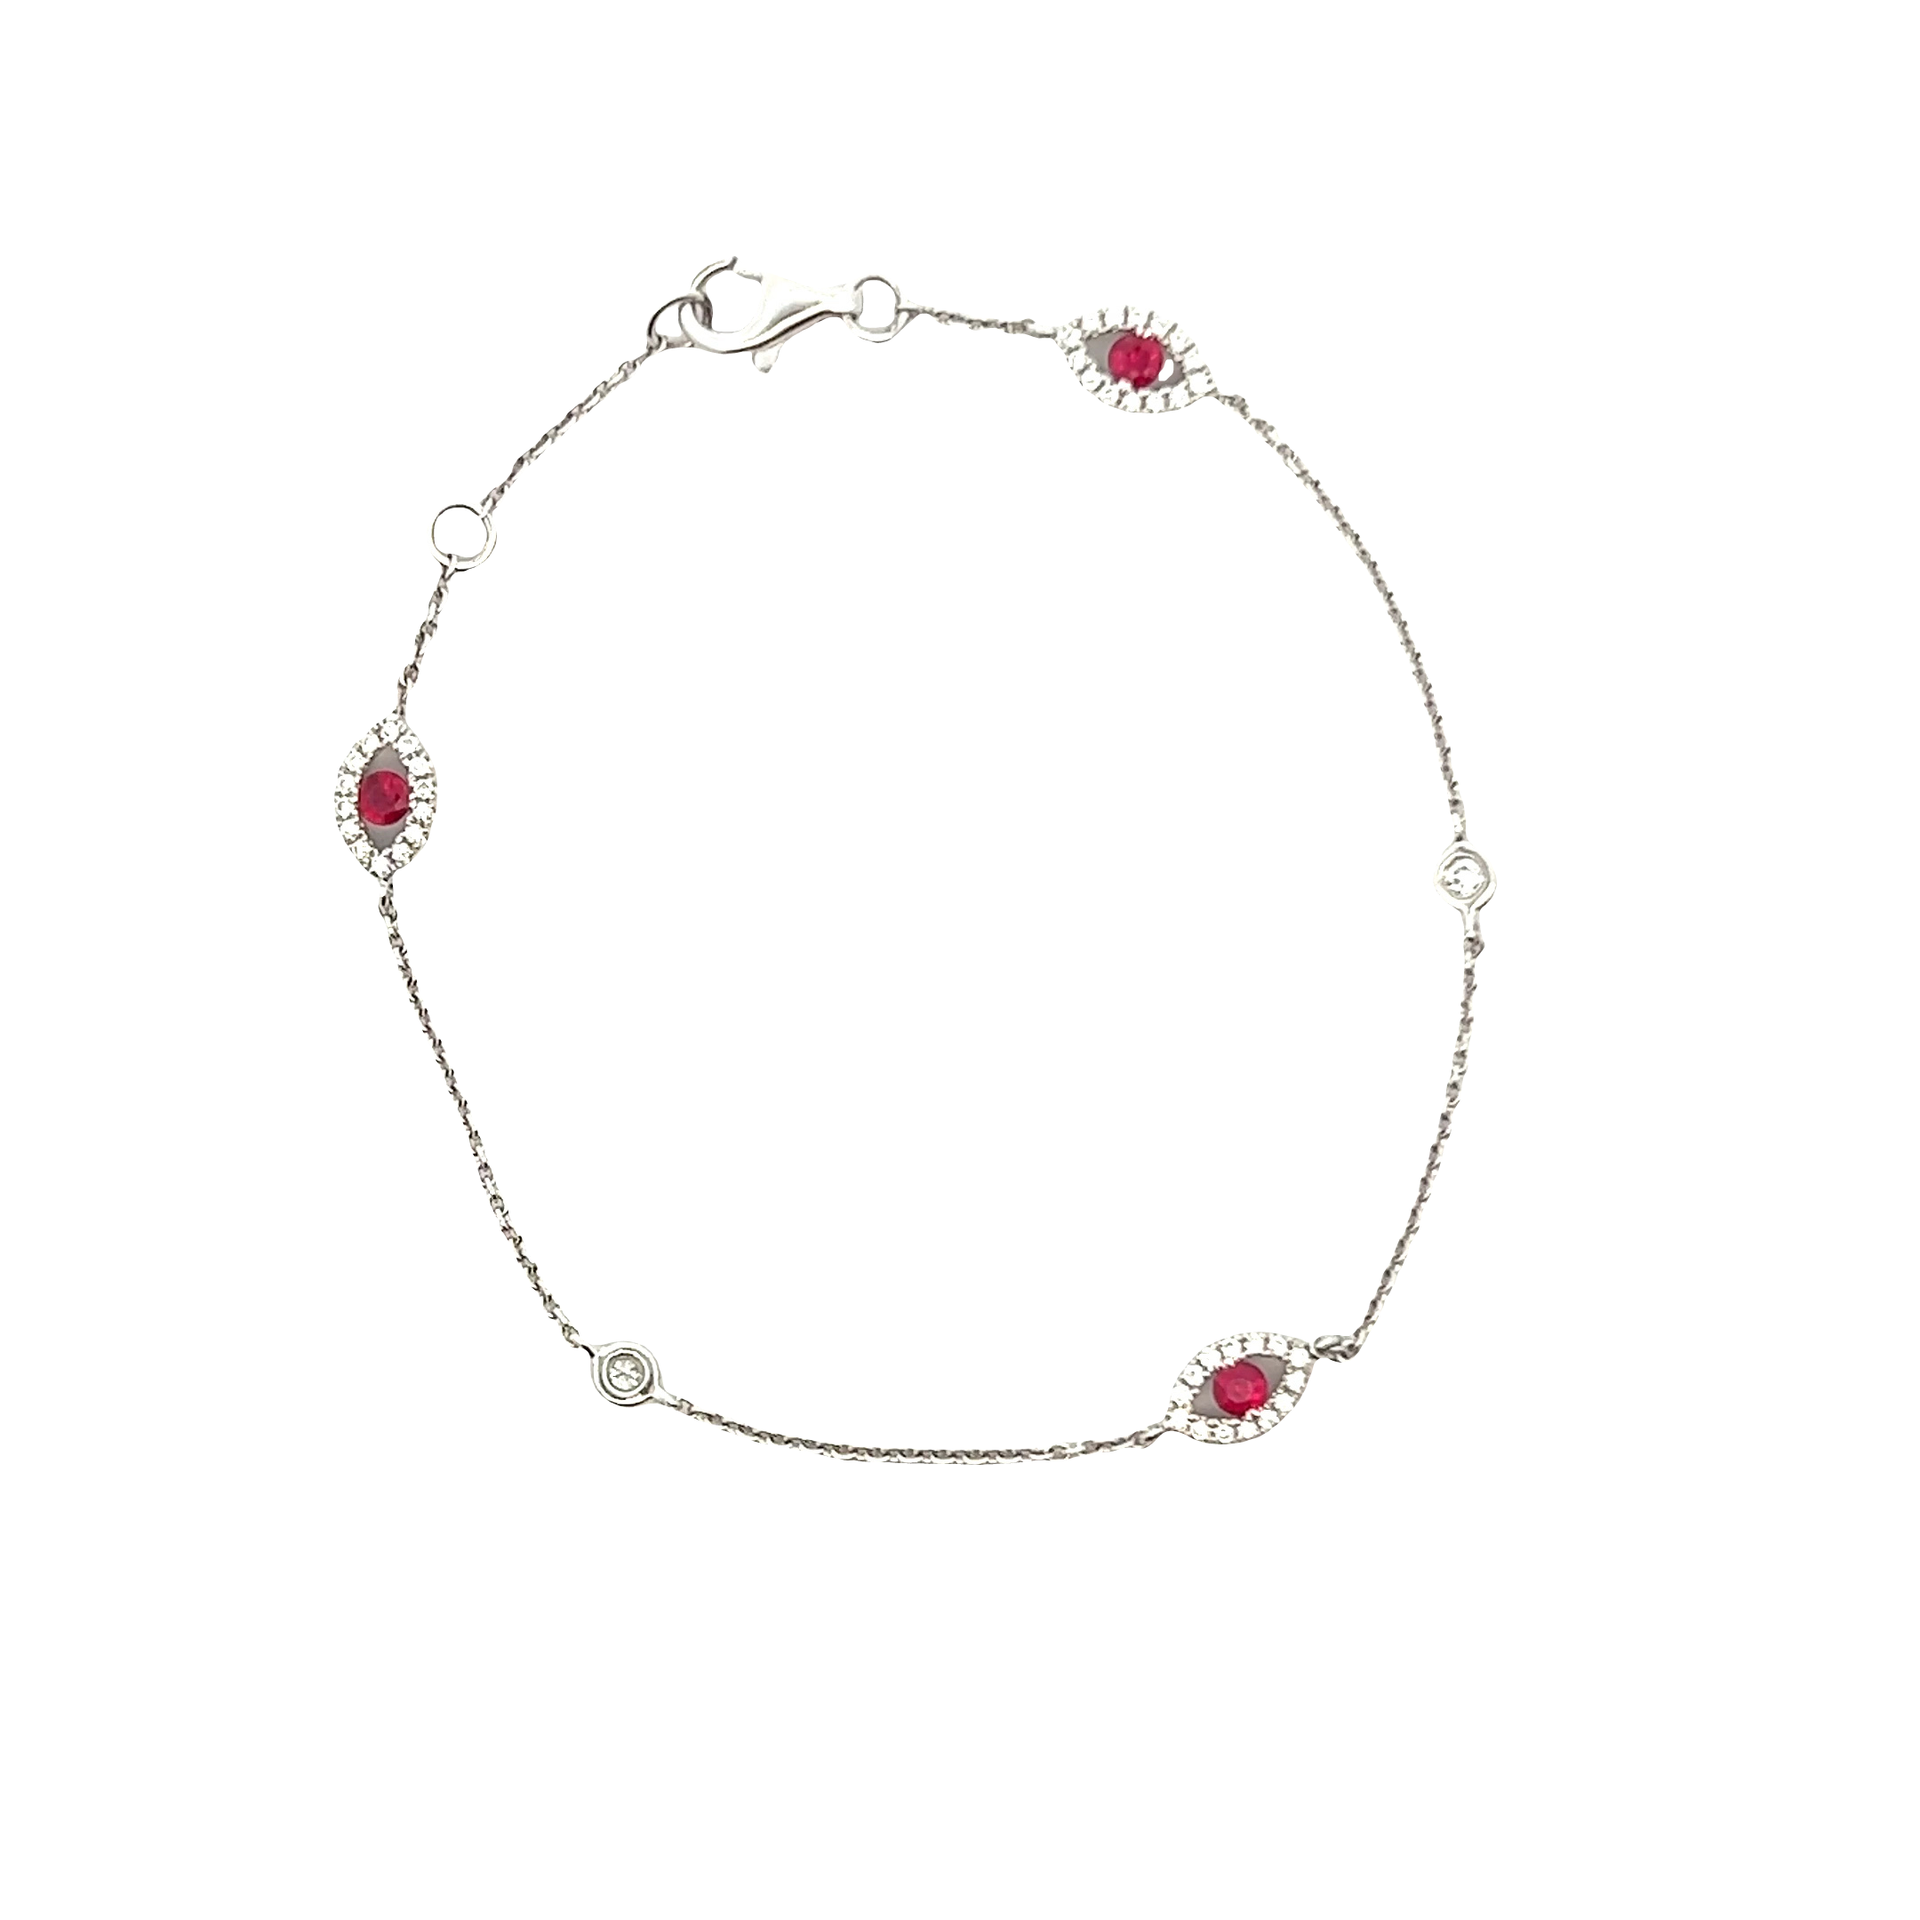 18KT WHITE GOLD, ROUND CUT DIAMOND AND RUBY CHAIN BRACELET.